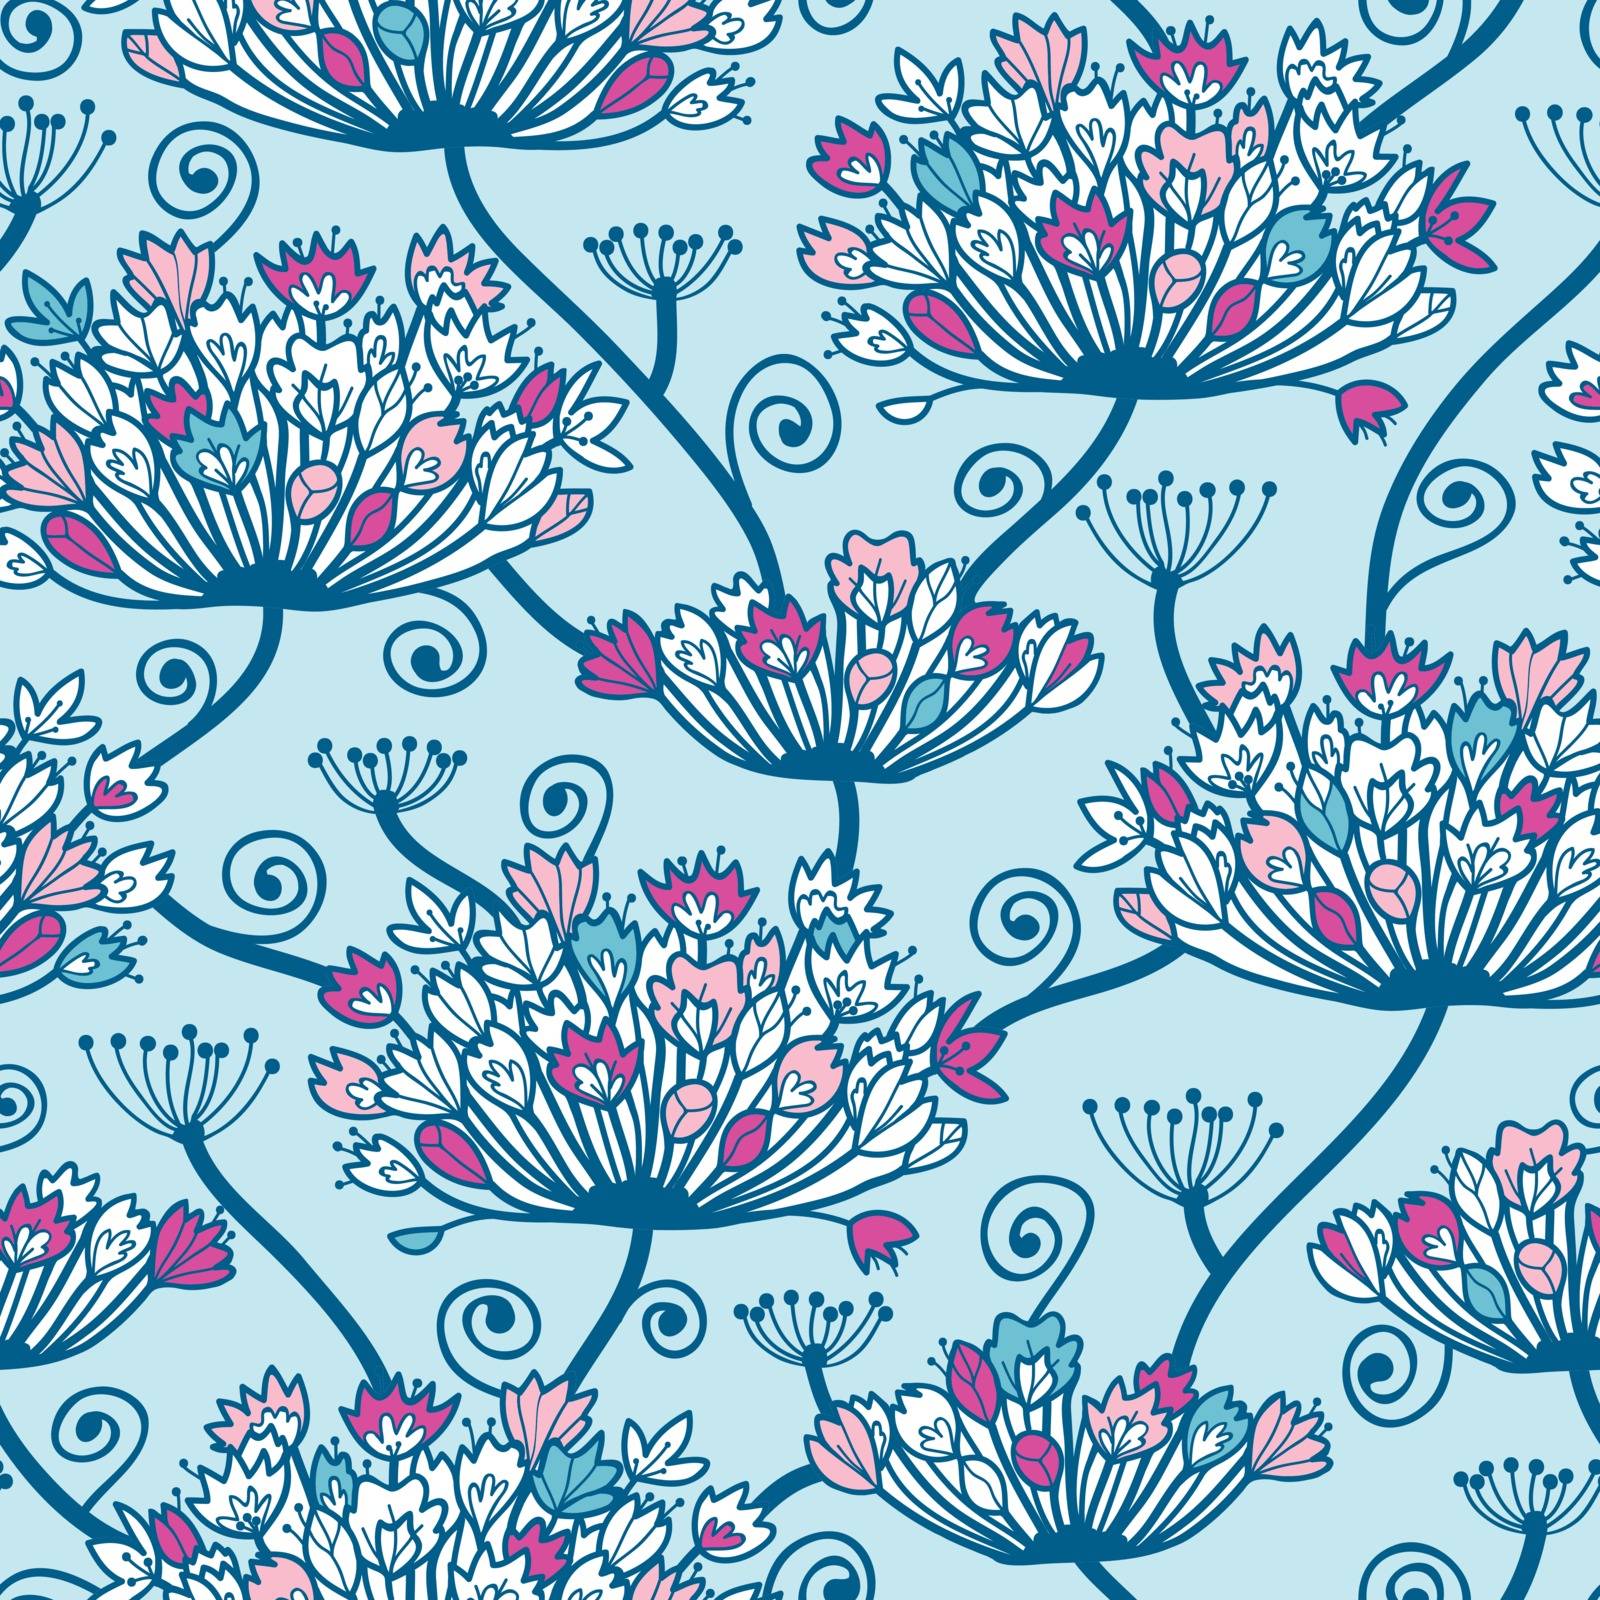 Vectpr Spring Flowers Seamless Pattern Background with hand draw elements